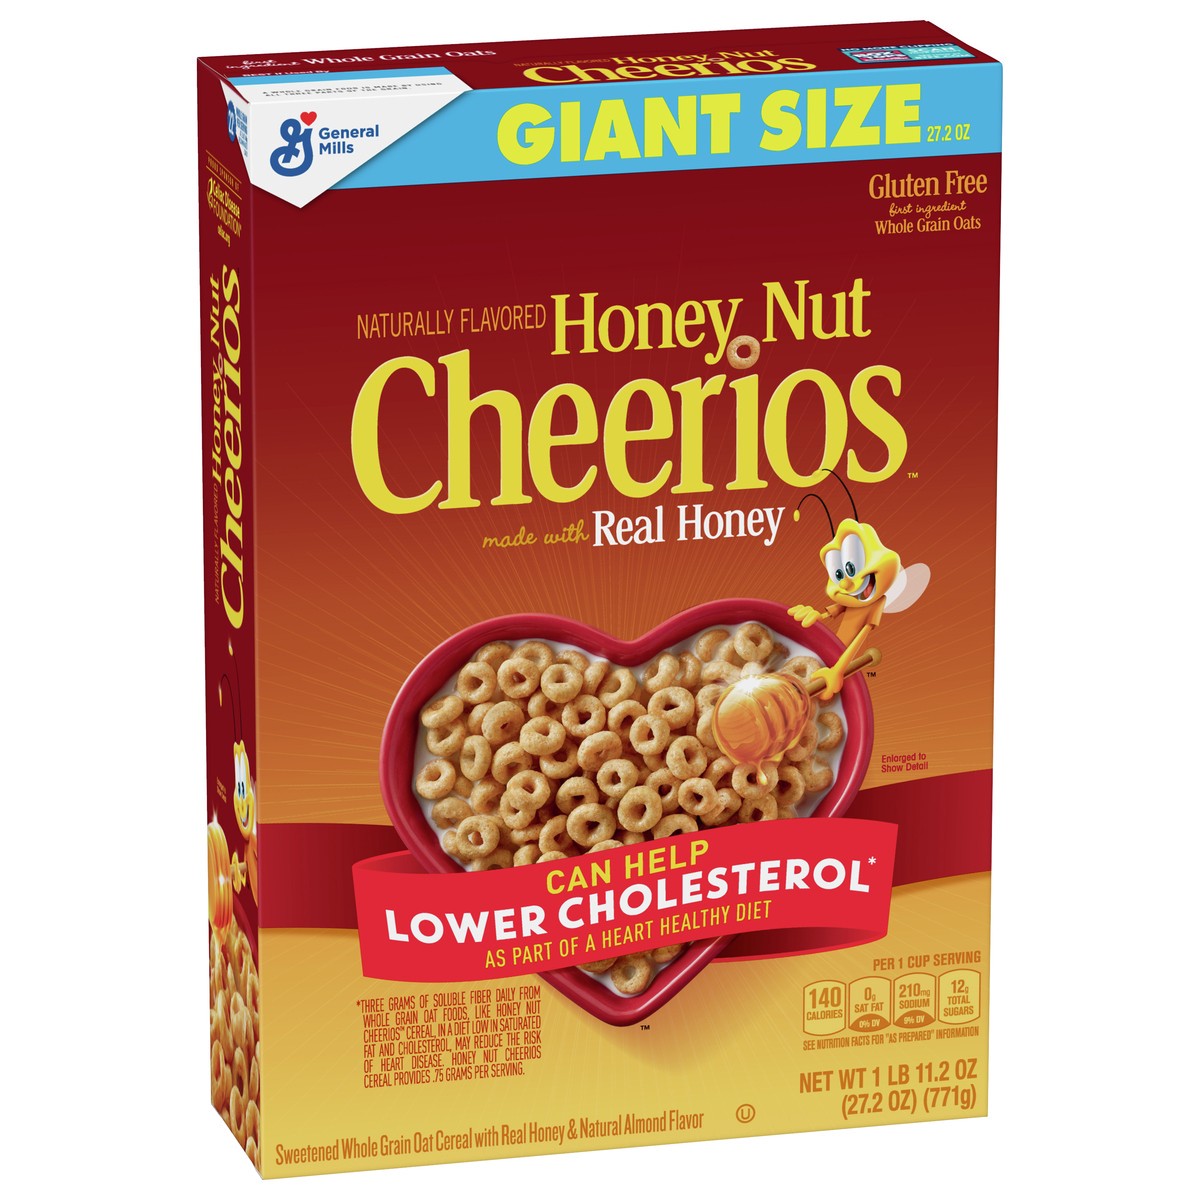 slide 2 of 9, Cheerios Honey Nut Cheerios Cereal, Limited Edition Happy Heart Shapes, Heart Healthy Cereal With Whole Grain Oats, Giant Size, 27.2 oz, 27.2 oz